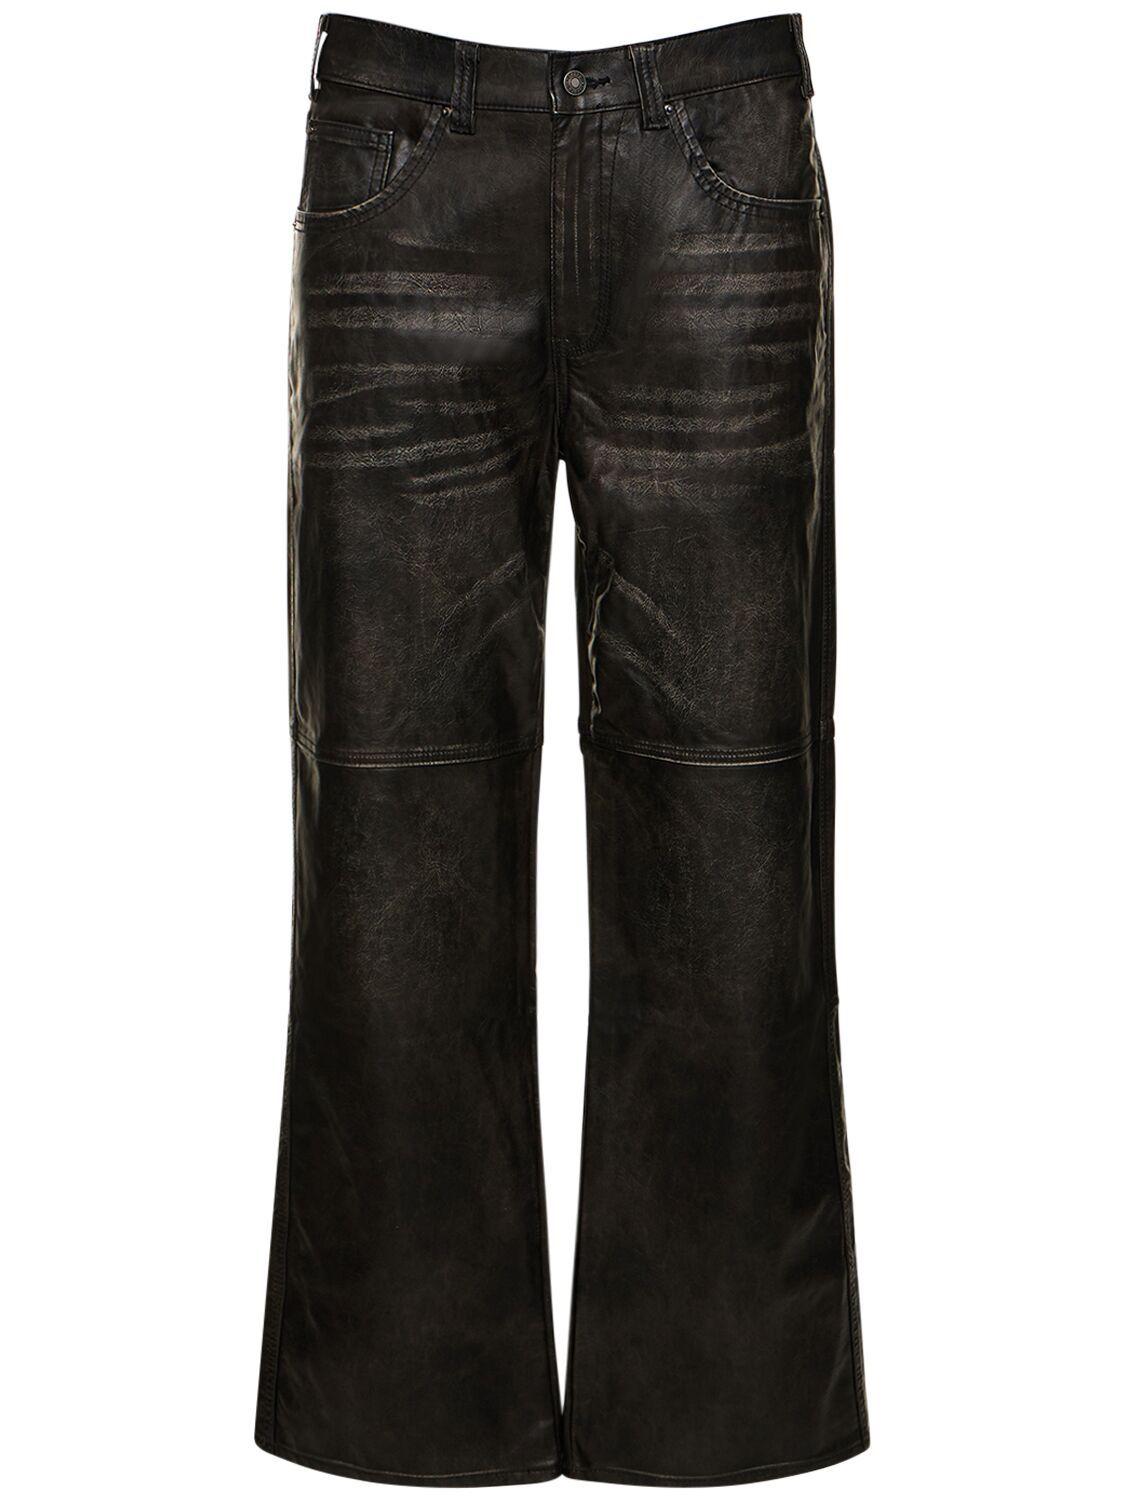 Jaded London Colossu Faux Leather Jorts in Black for Men